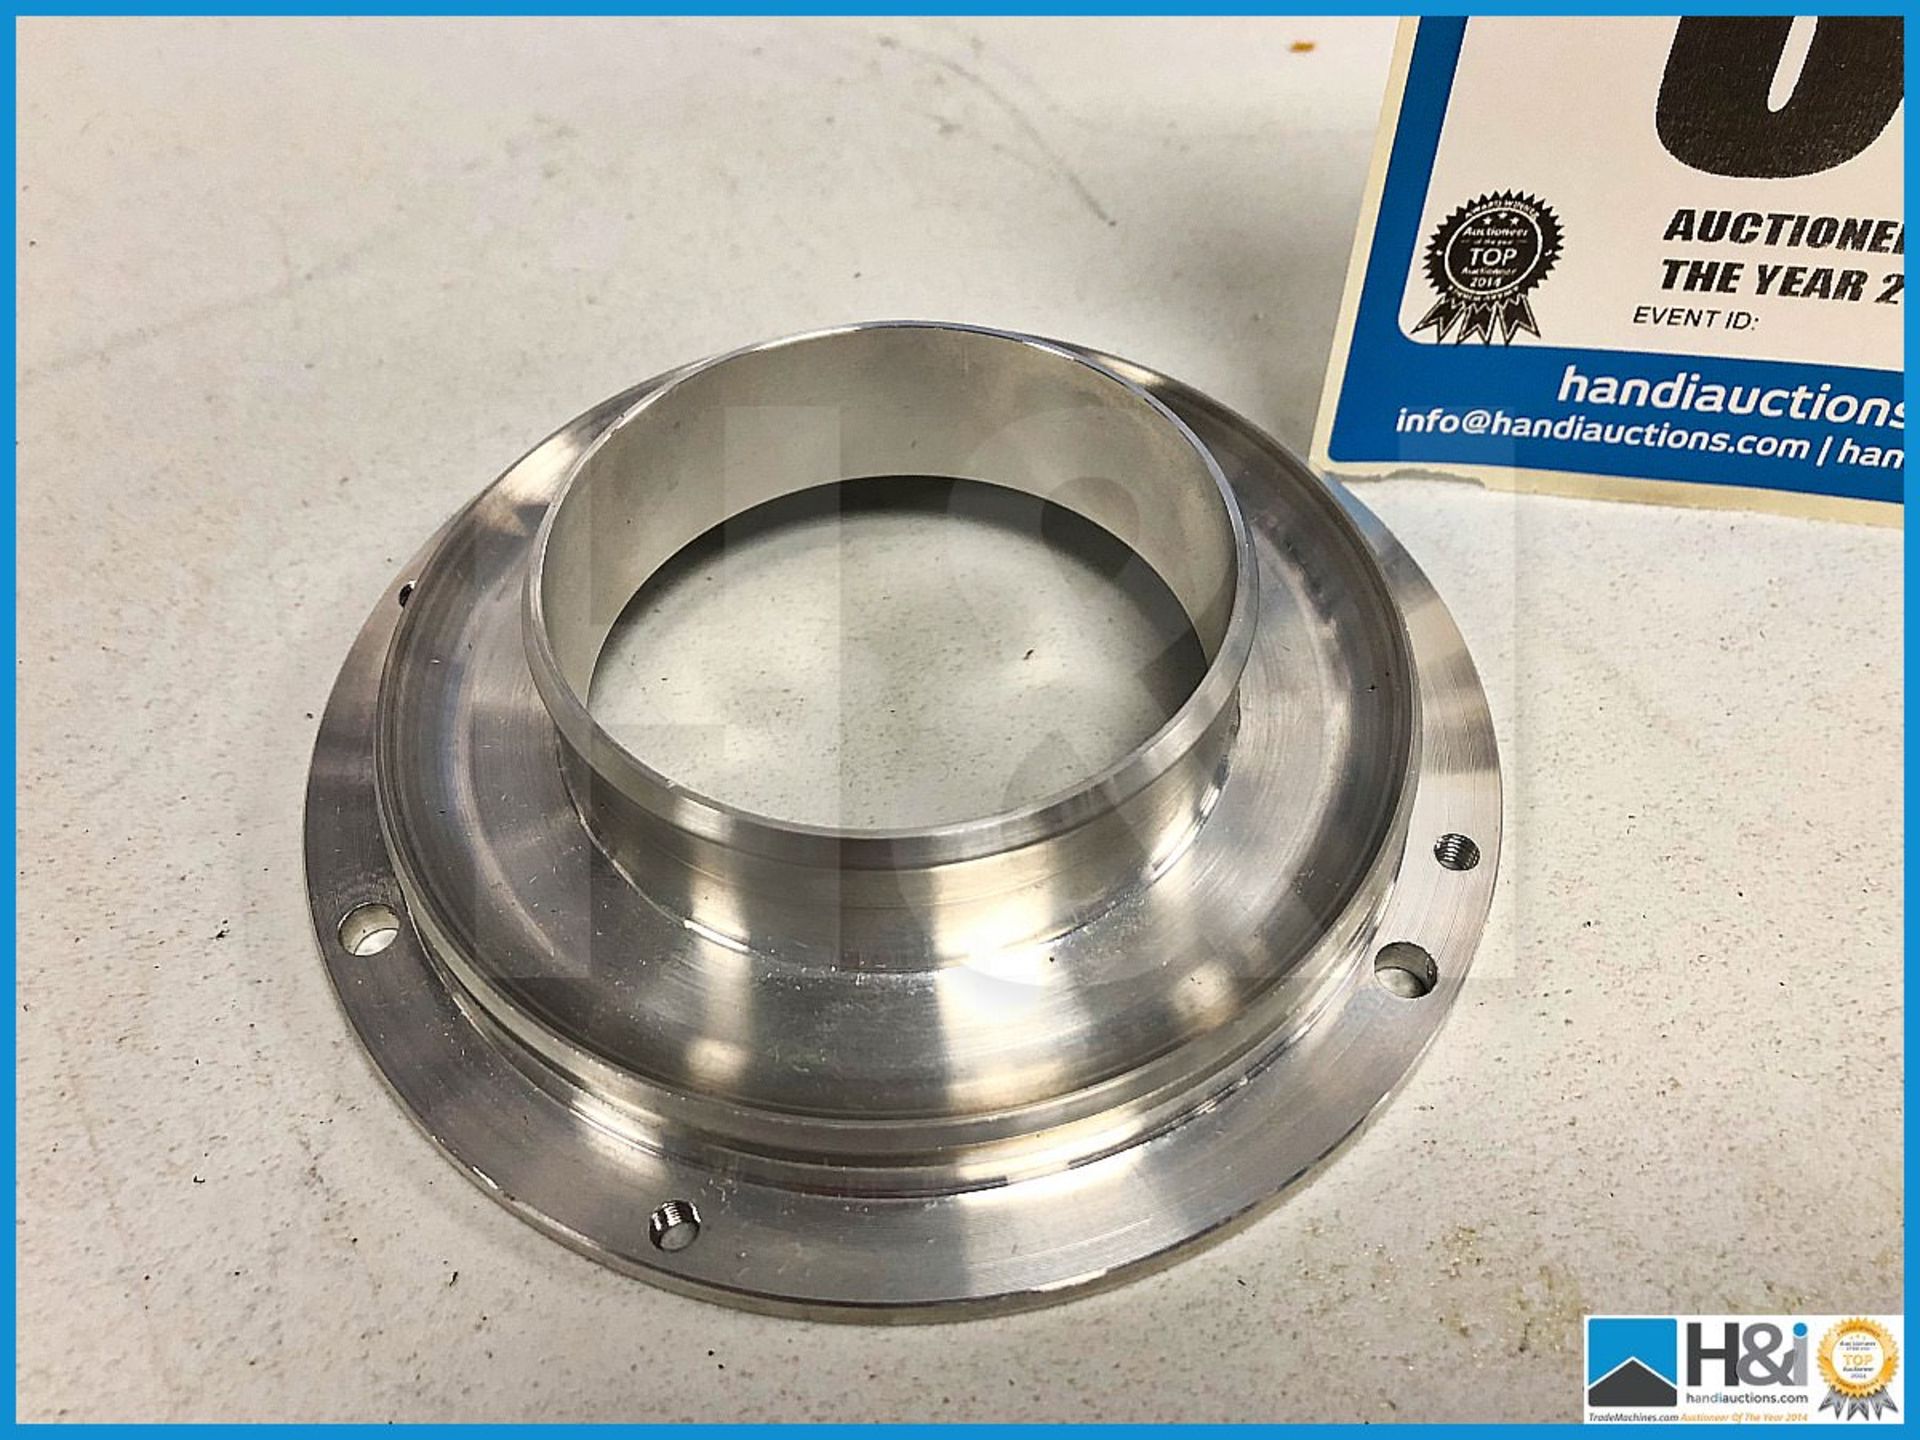 17 x Cosworth Lotus GLC GT2 restrictor flange. Code: 20024563. Lot 263 - Image 2 of 2